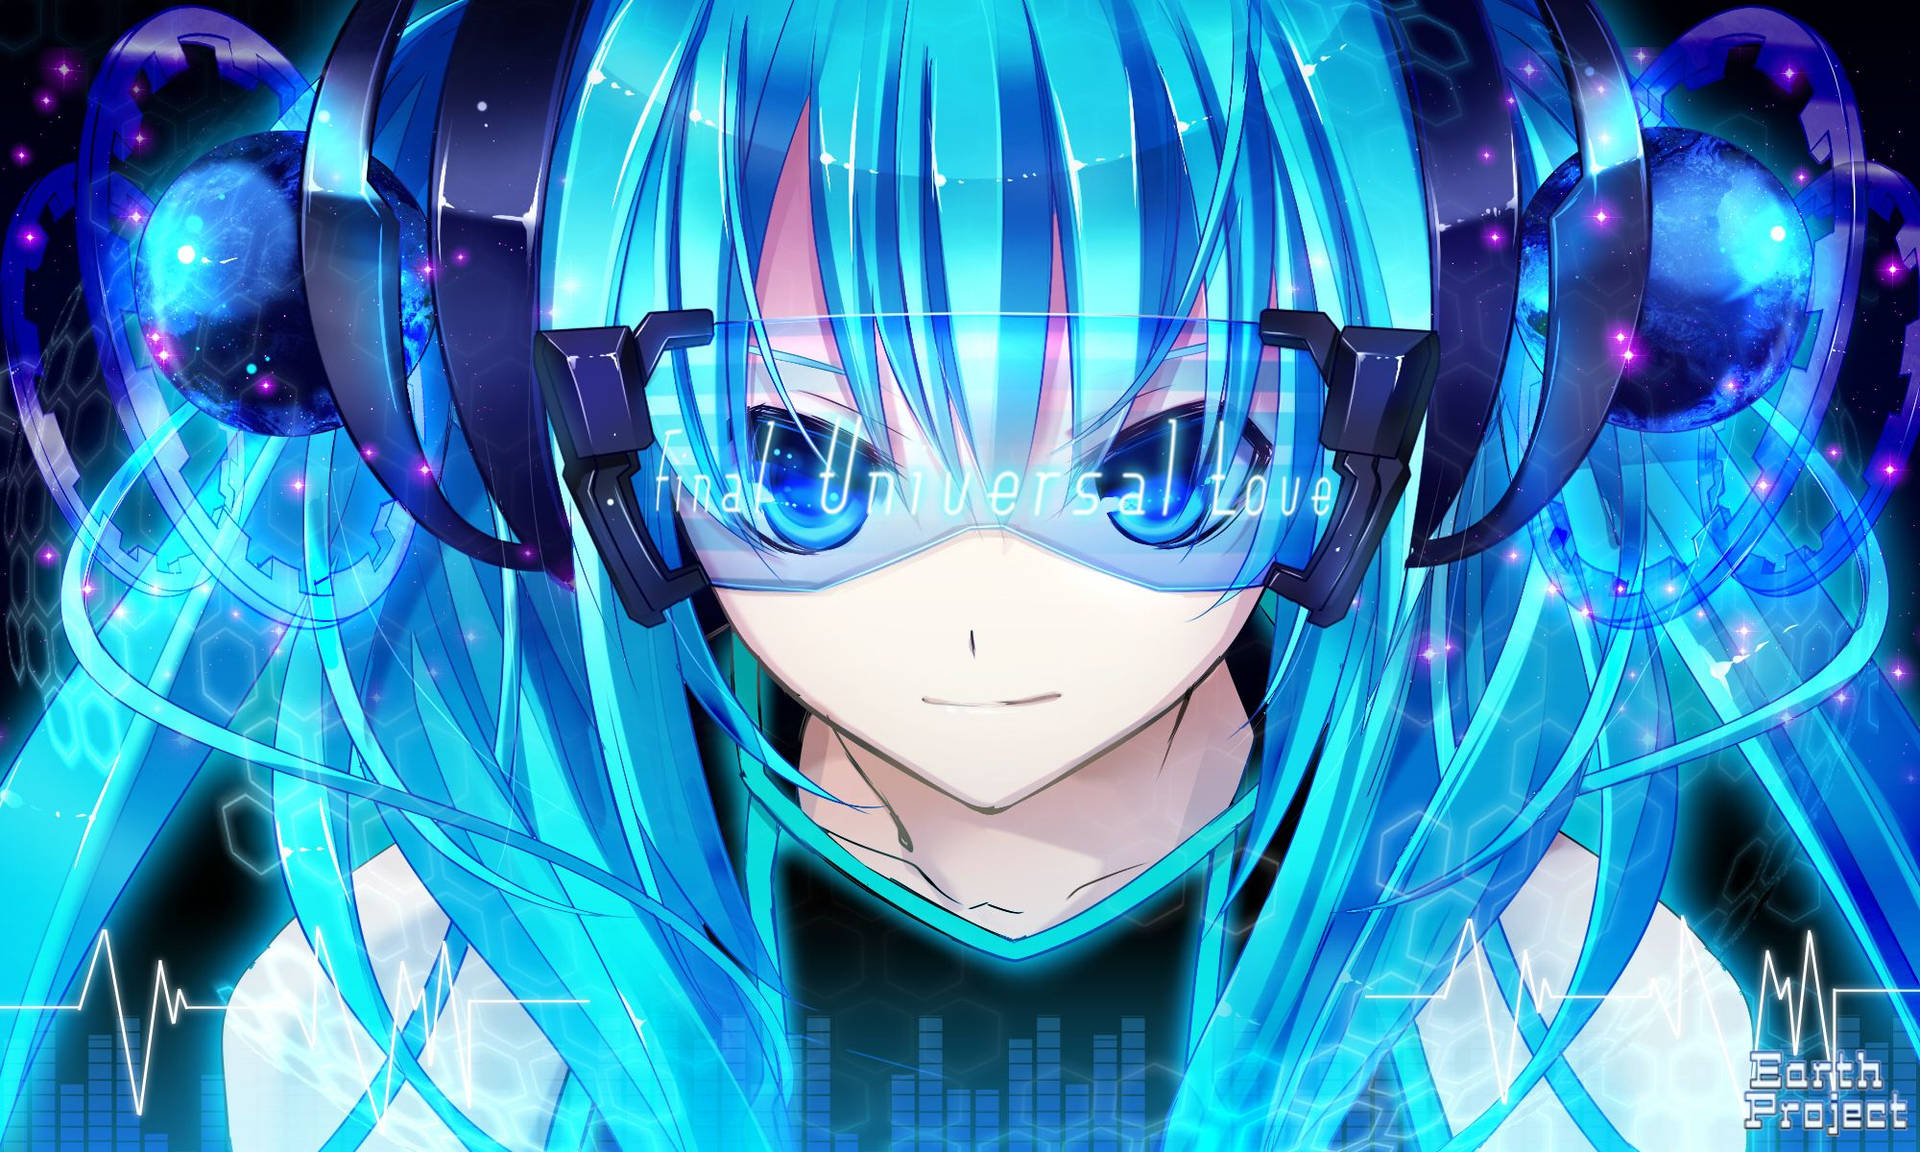 Hatsune Miku delights with a colorful and electrifying performance Wallpaper